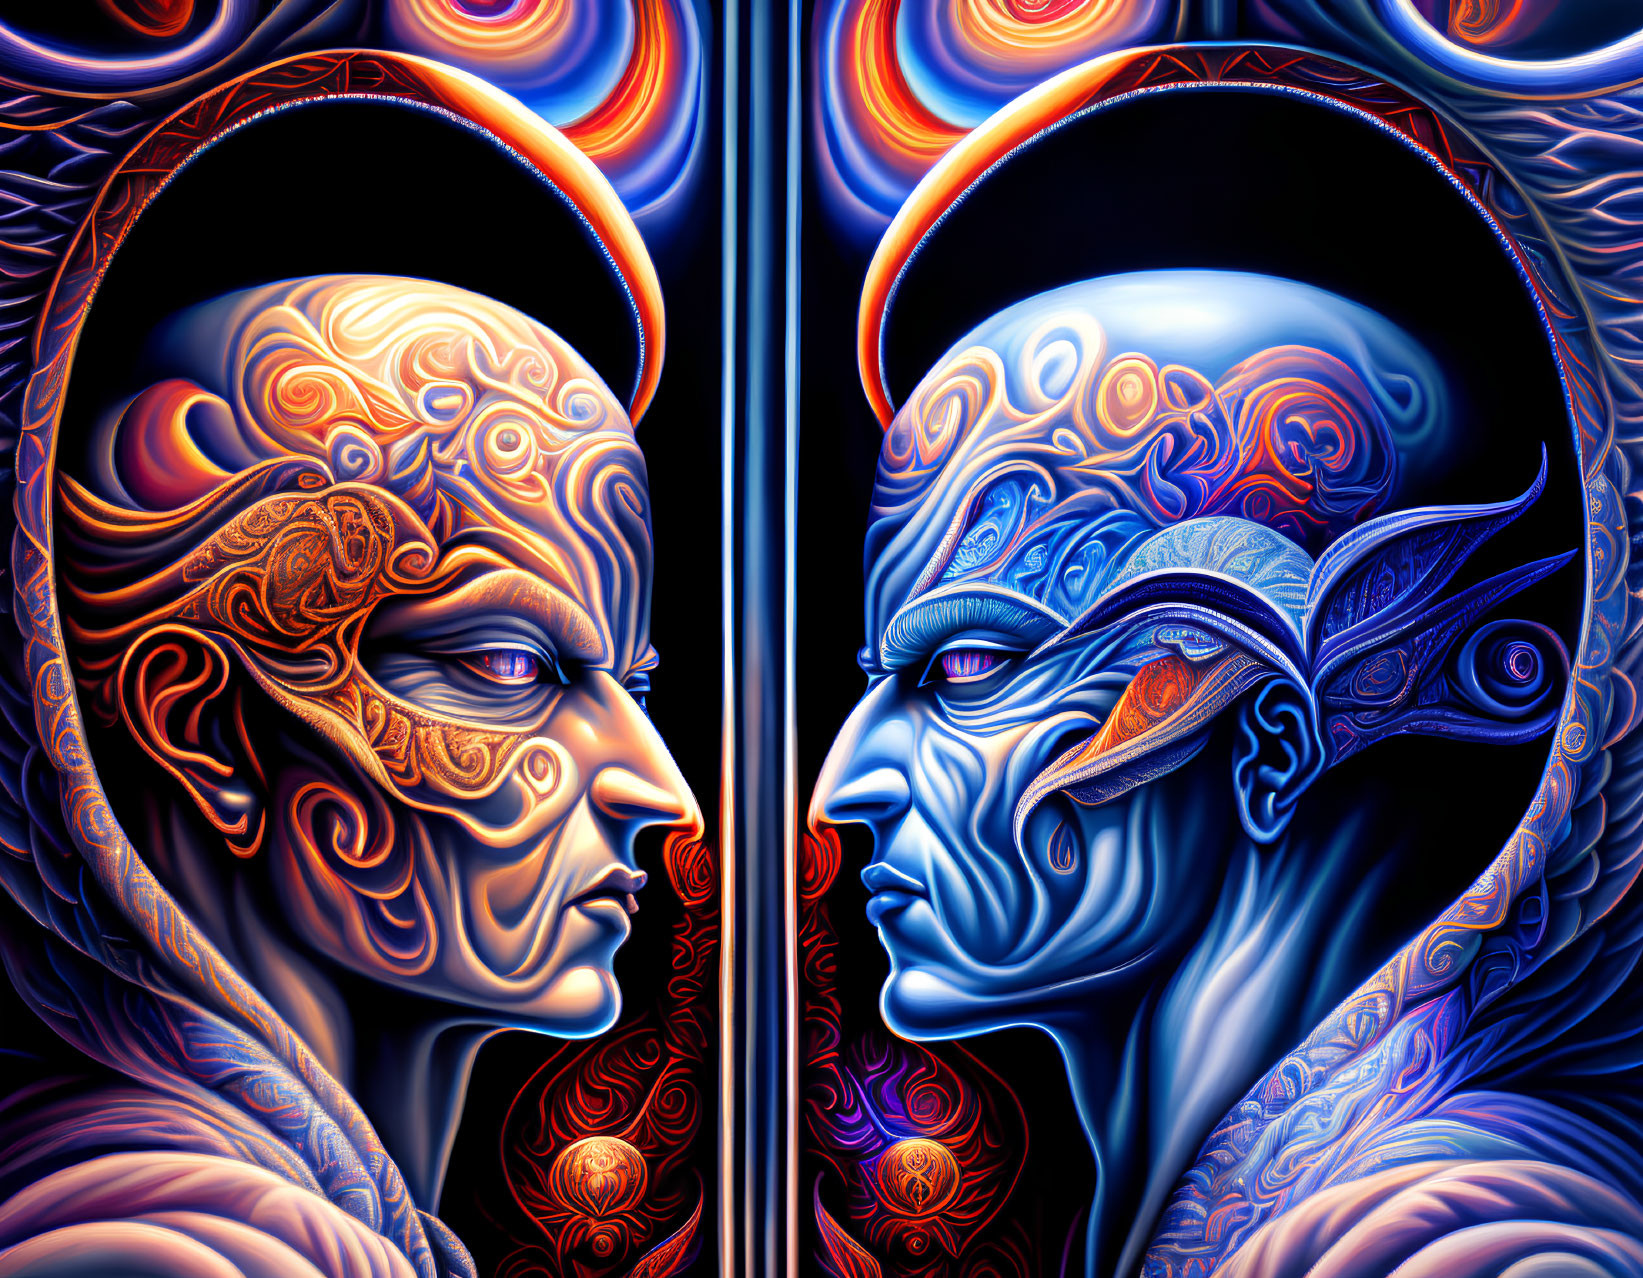 Vividly Colored Symmetrical Faces with Intricate Patterns